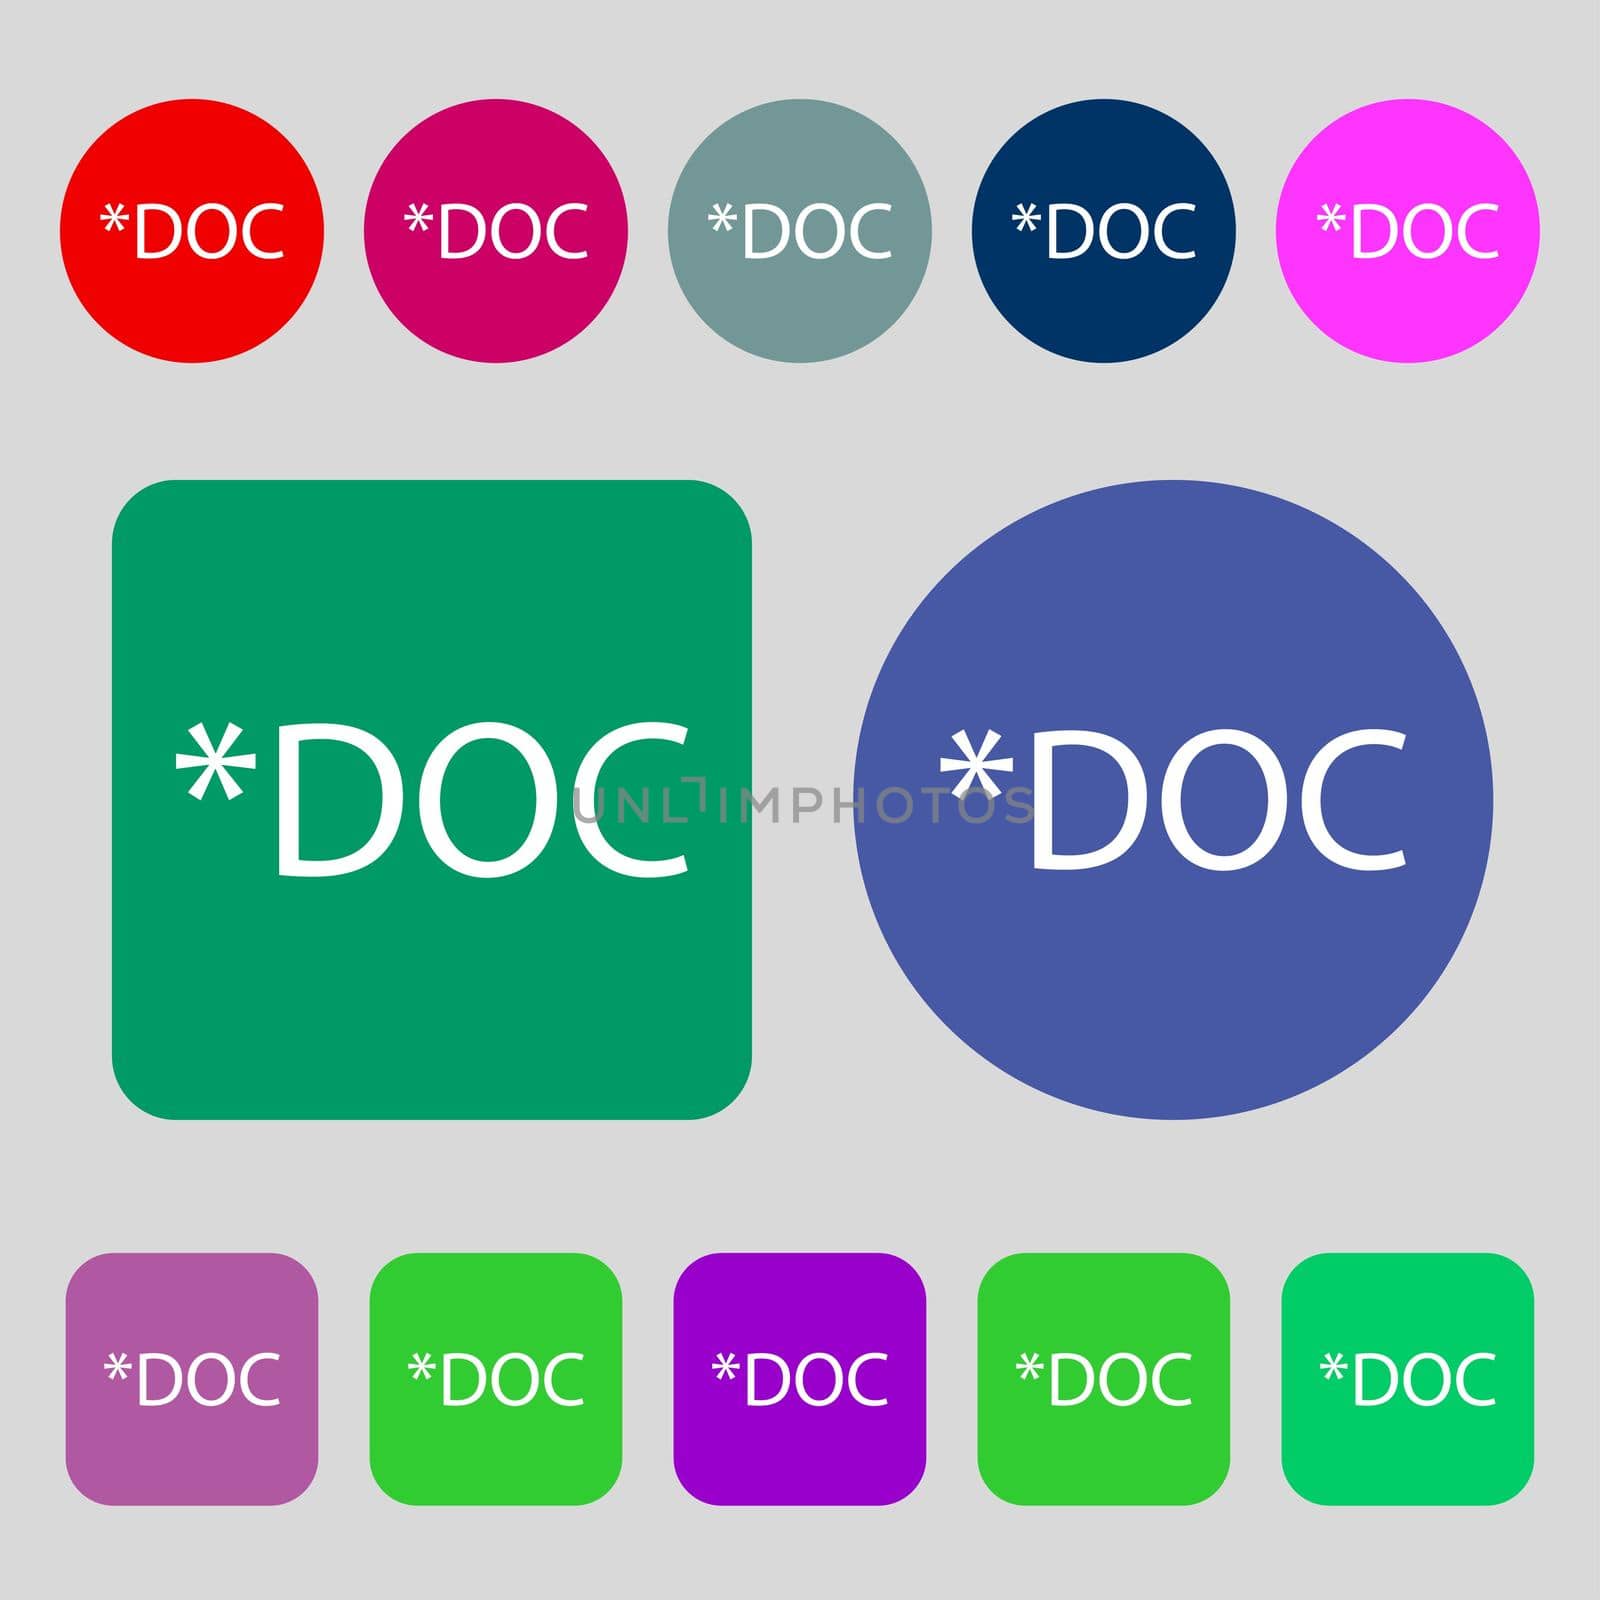 File document icon. Download doc button. Doc file extension symbol.12 colored buttons. Flat design. illustration